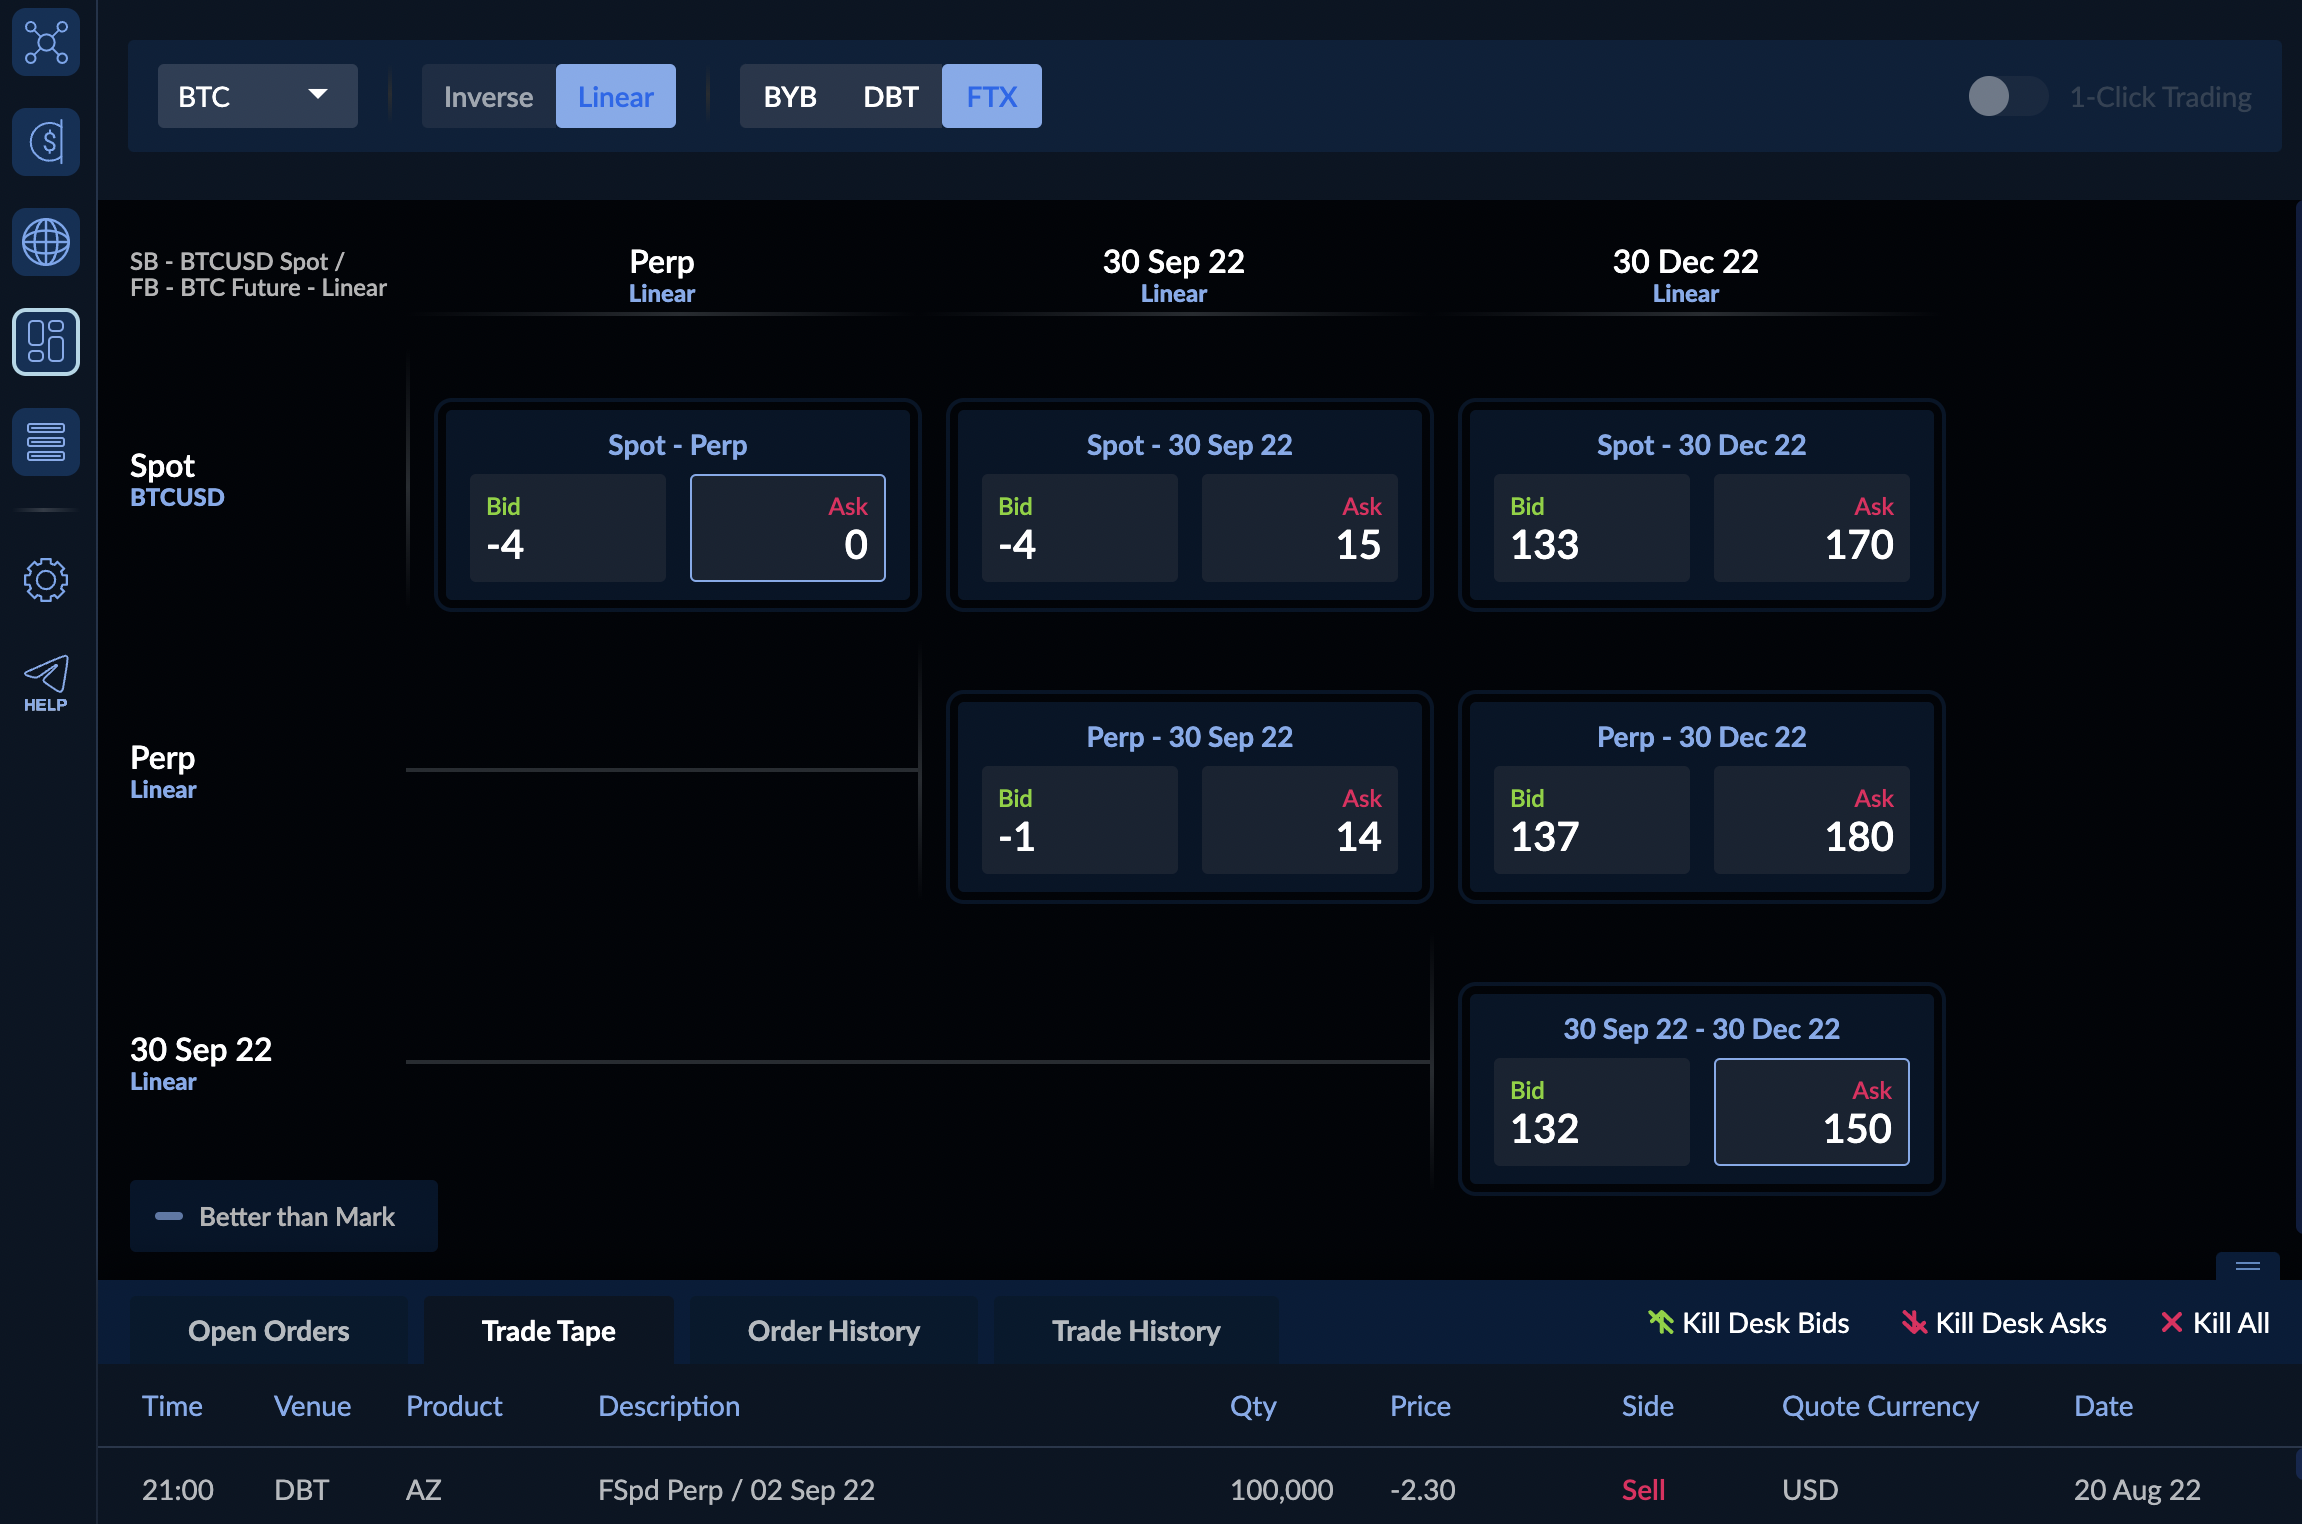 The future spreads dashboard on Paradigm with potential spread trades laid out in a grid.